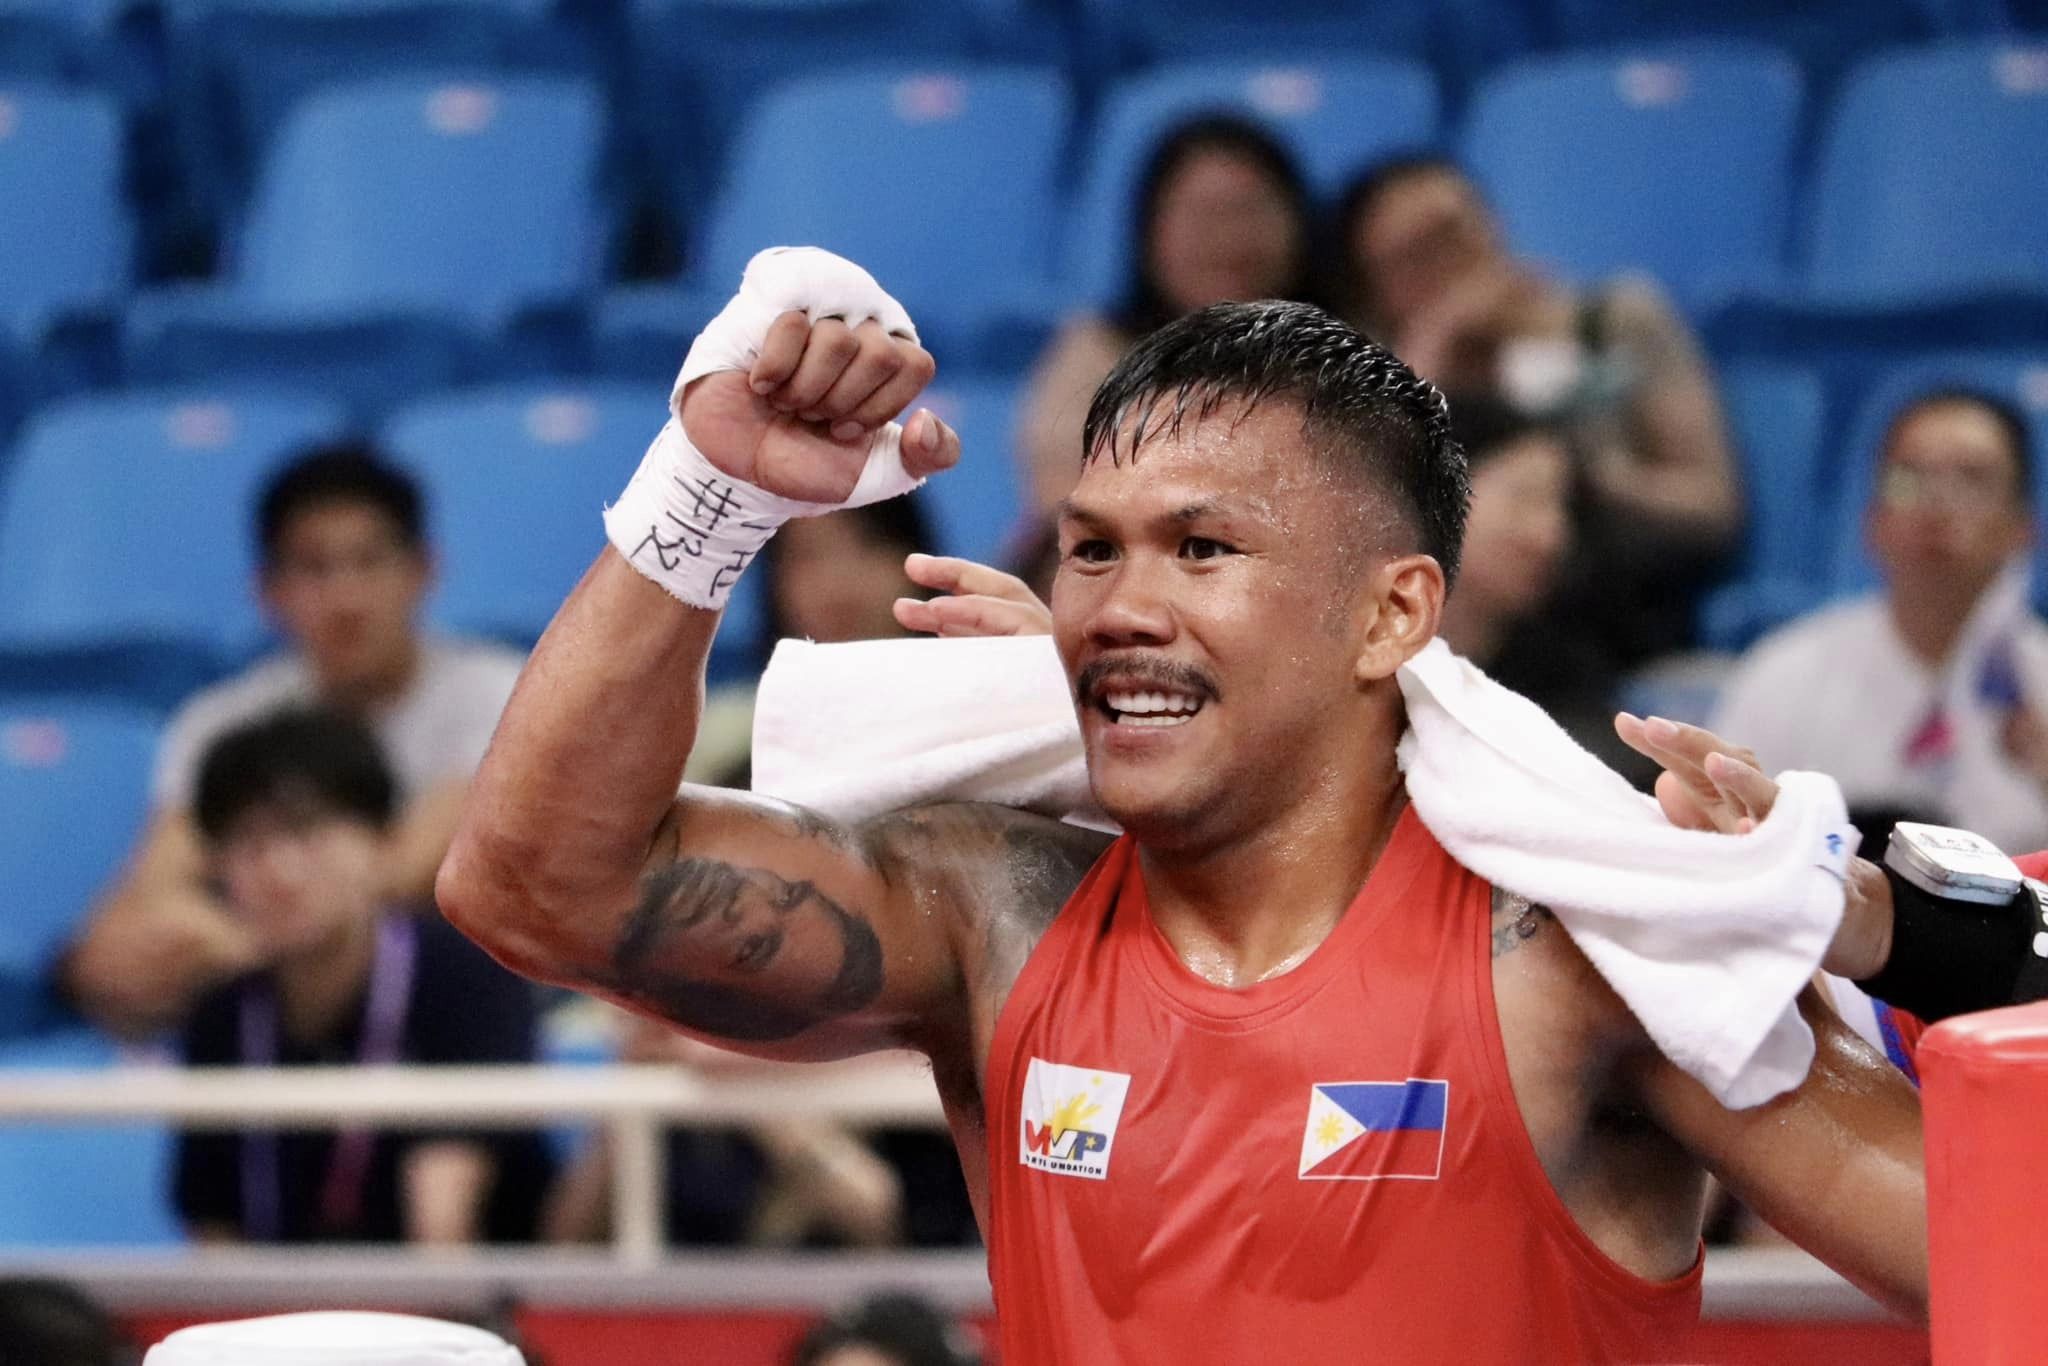 HANGZHOU, China—Eumir Marcial saw his Olympic dream gradually taking shape after advancing to the quarterfinals in boxing at the 19th Asian Games here.Marcial moved three steps closer to a return trip to the Olympics next year in Paris following a 5-0 conquest of Vietnam’s Manh Cuong Nguyen in the men’s 80kg round of 16 late Friday evening at the Hangzhou Gymnasium.
The Tokyo Olympics bronze medalist faces Thailand’s Weerapon Jongjoho in the quarters where the winner will be guaranteed of a bronze medal.
Jongjoho ousted Japanese Issei Aramoto in a referee stopped contest in the round of 16.
Only the finalists in each division will punch a ticket to Paris.
Marcial, who claimed the bronze in the middleweight category during the 2018 Asiad, joined Carlo Paalam (men’s 57kg) and heavyweight John Marvin as the only surviving Filipino boxers out of 10 entries.
